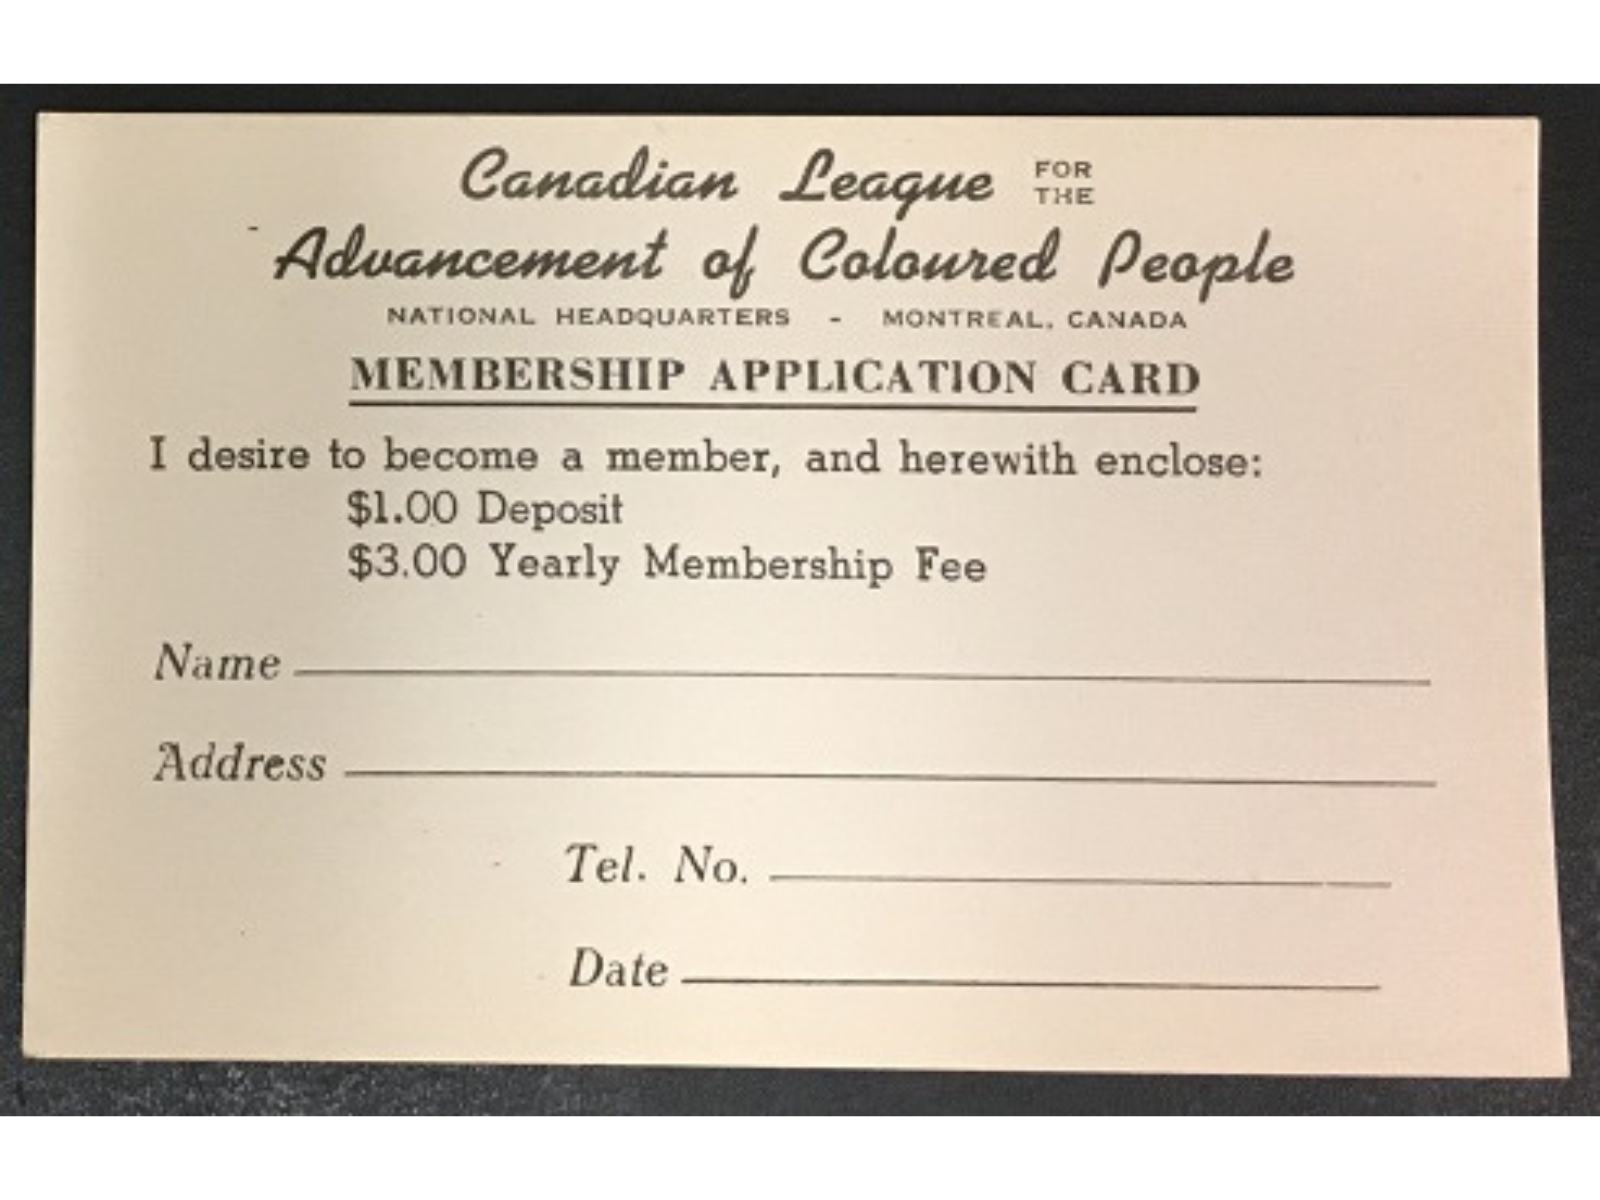 A blank membership application card for the Canadian League for the Advancement of Coloured People.